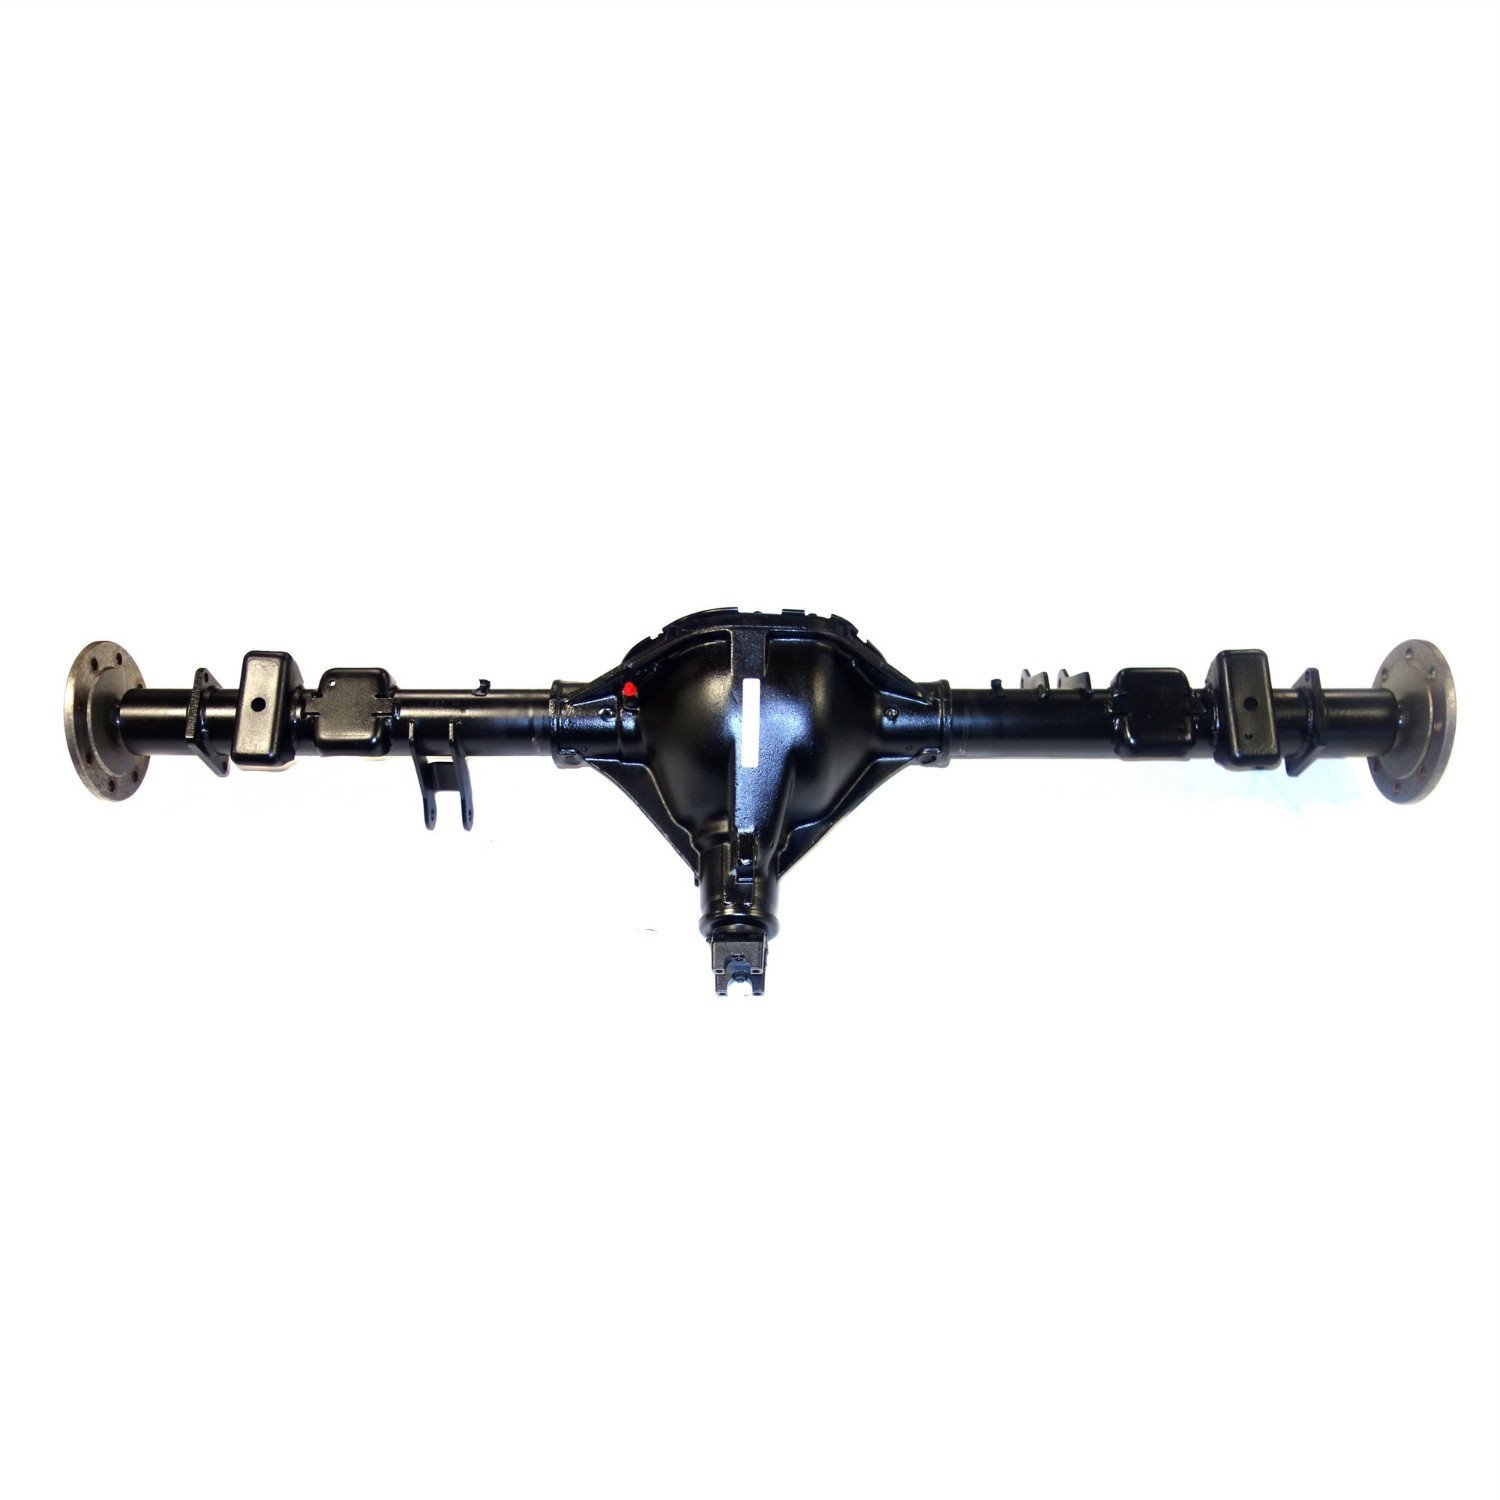 Remanufactured Axle Assy for GM 9.5" 2009 GM Van 2500 & 3500 3.73 with Active Brakes